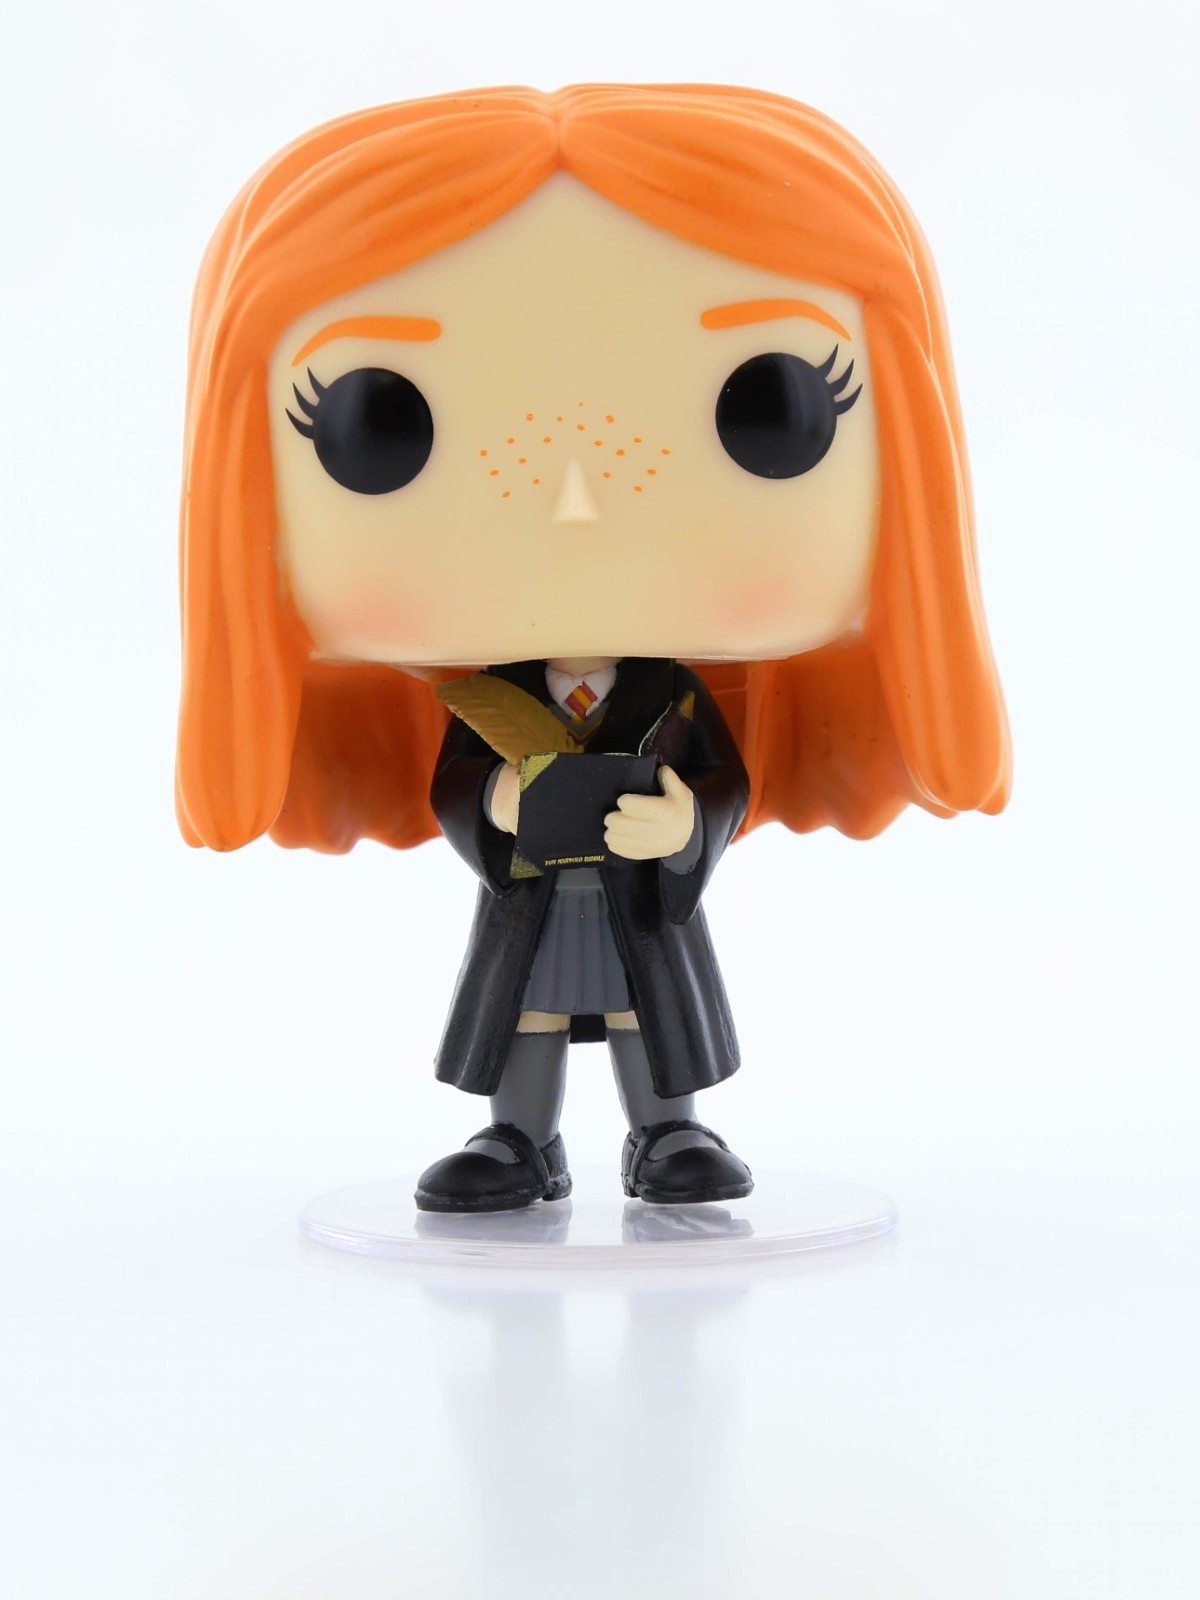 Funko Pop Harry Potter S5 Ginny Weasley with Diary